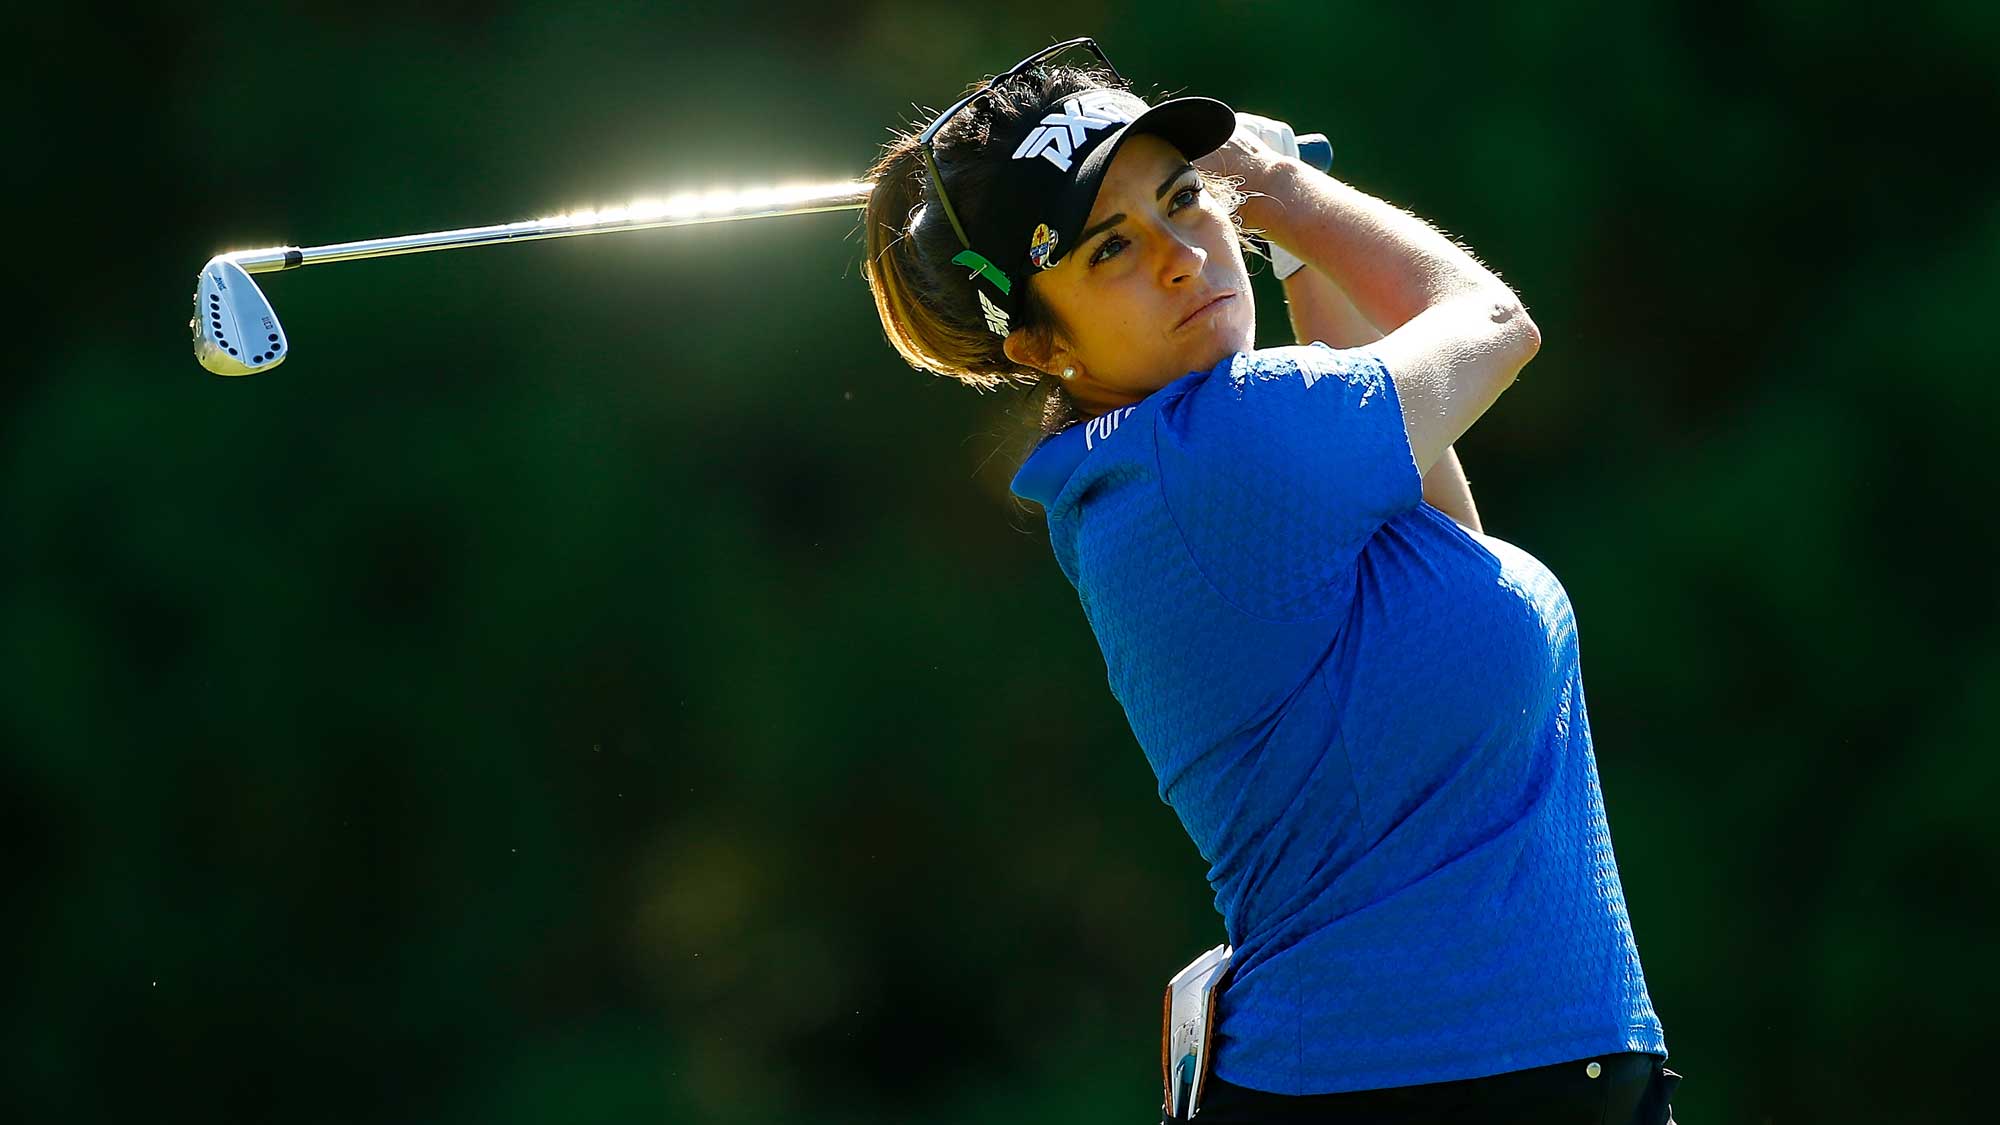 Gerina Piller tees off on the 2nd hole during the second round of the LPGA Cambia Portland Classic